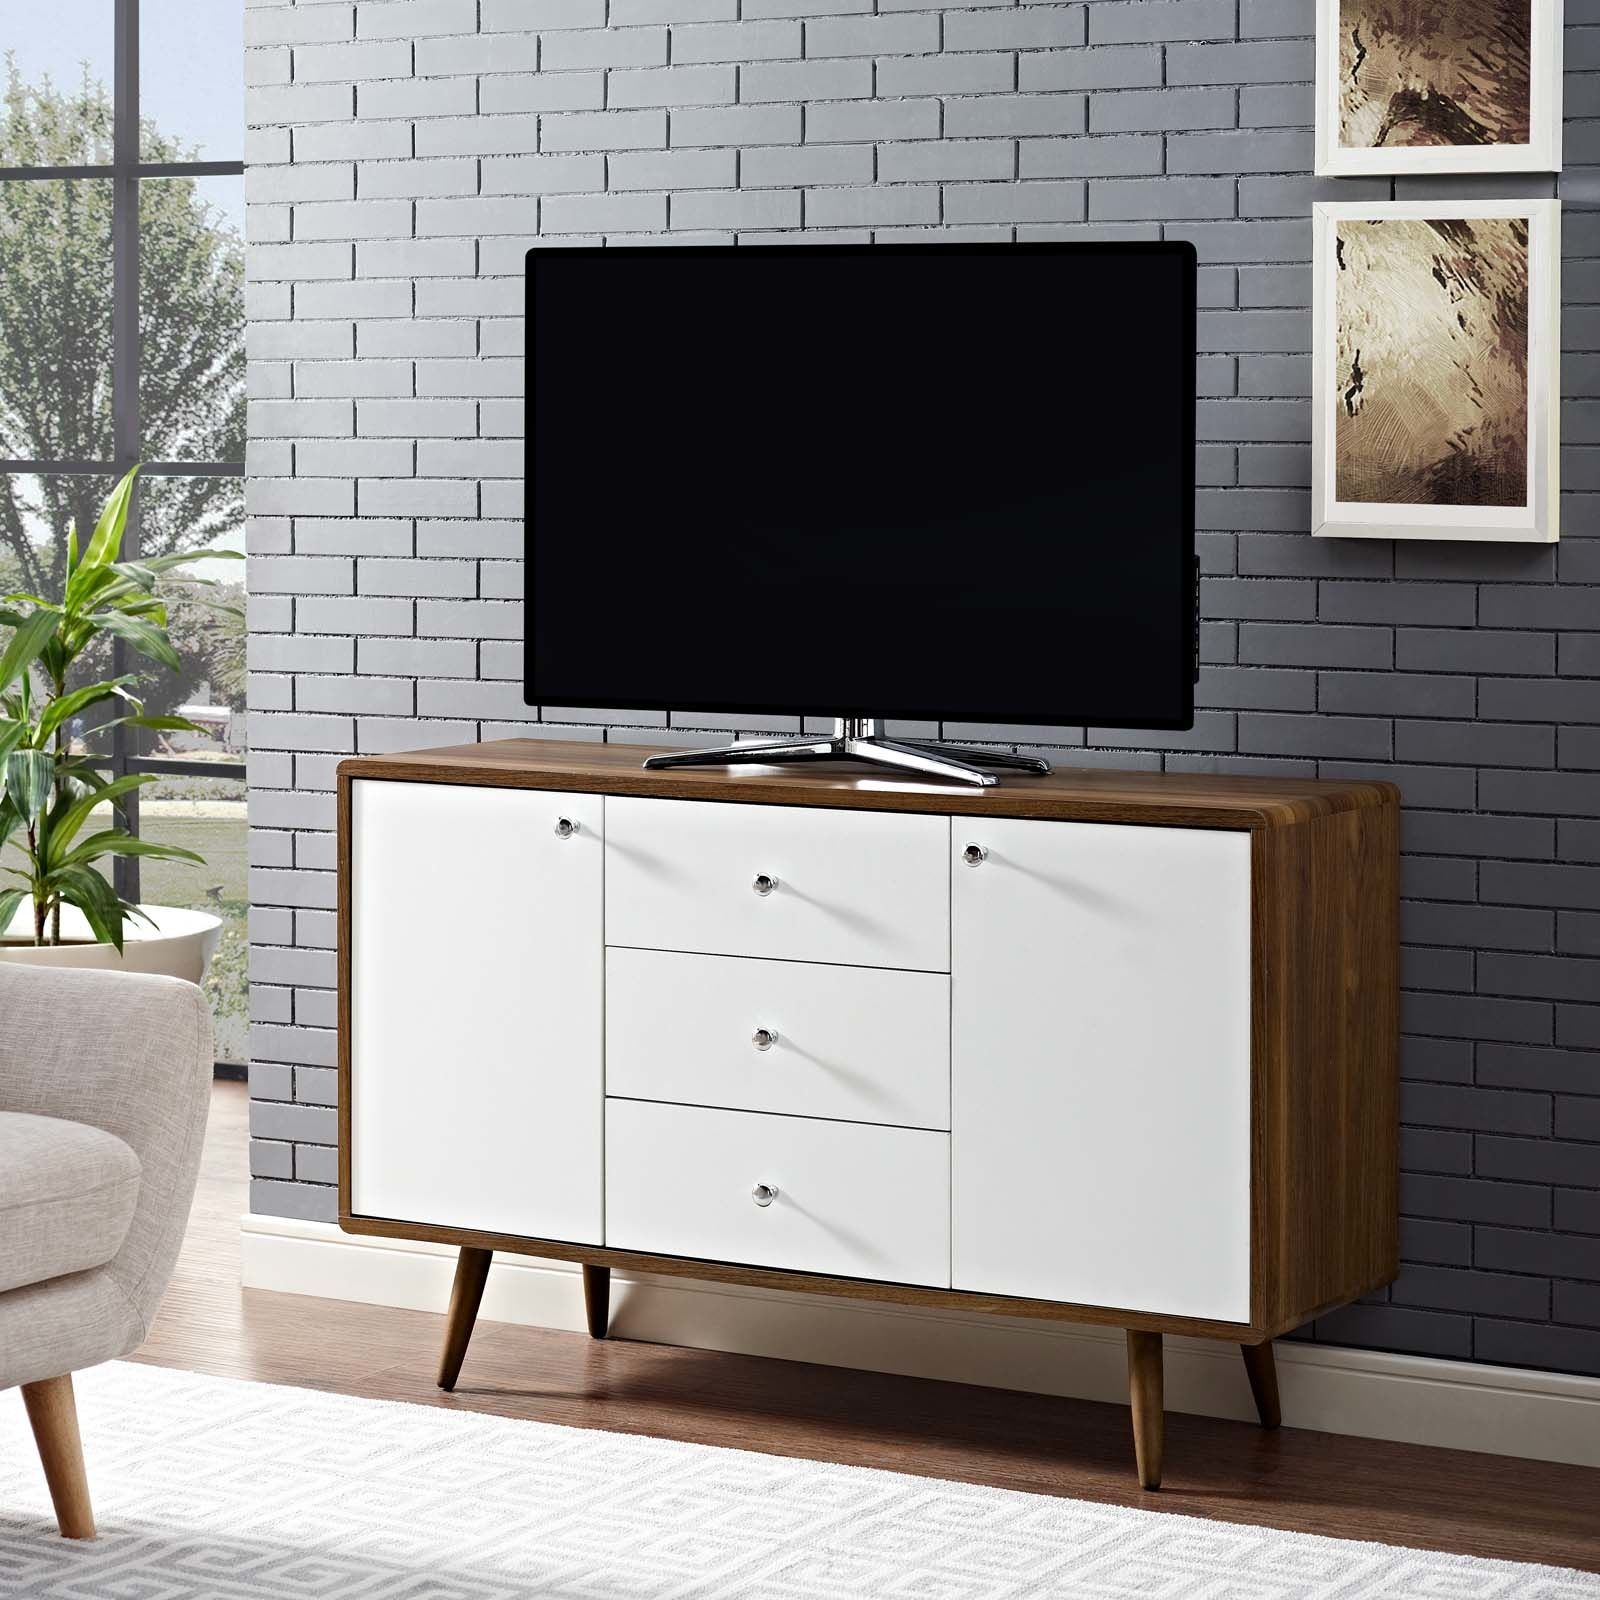 Get The Transmit Sideboard – Walnut White From Opensky Now With Fugate 48" Wide 4 Drawer Credenzas (View 2 of 15)